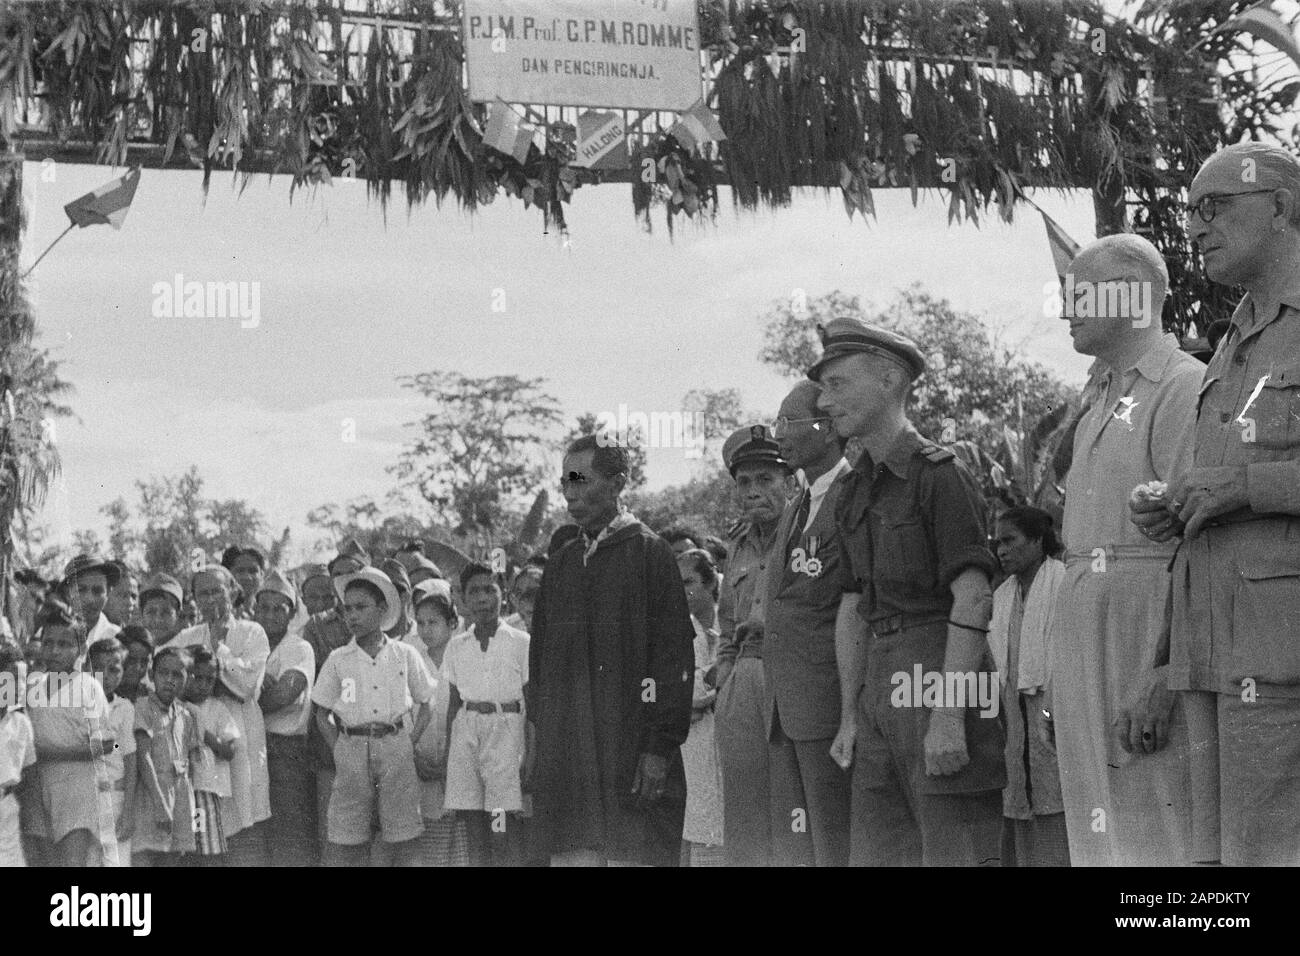 Visit Minister Romme to Great East [Makassar, Menado, Ambon, Flores, Surabaya] Description: Ambon. Reception Christian negory. Dr. C.P.M. Romom local female choir. Left next to him resident Fishermen, in addition an older man in costume with distinction (sengadji?) Annotation: At the welcome gate hangs a sign on which to read trap. P.J.M. Prof. C.P.M. Romme dan pengiringnja), Fully right Volkskrant journalist W. Snitke Date: 30 January 1947 Location: Indonesia, Dutch East Indies Personal name: Romme, C.P.M. Stock Photo